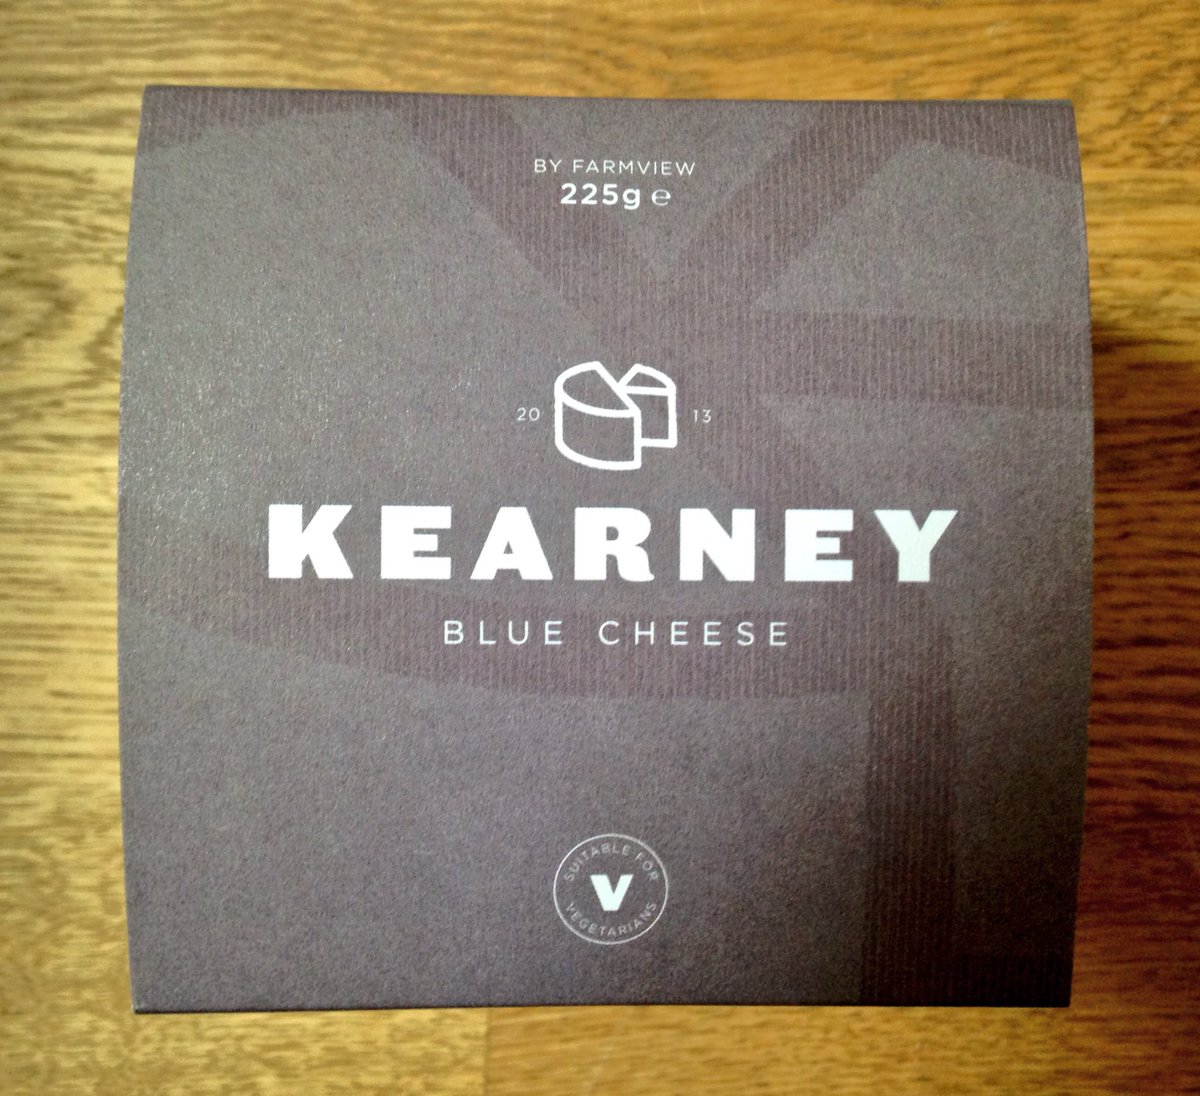 Another ⭐️⭐️⭐️ #GTA16 winner stocked @IndieFude the stunning @kearneycheeseco #blue #cheese #lovelocal #enjoyNI16